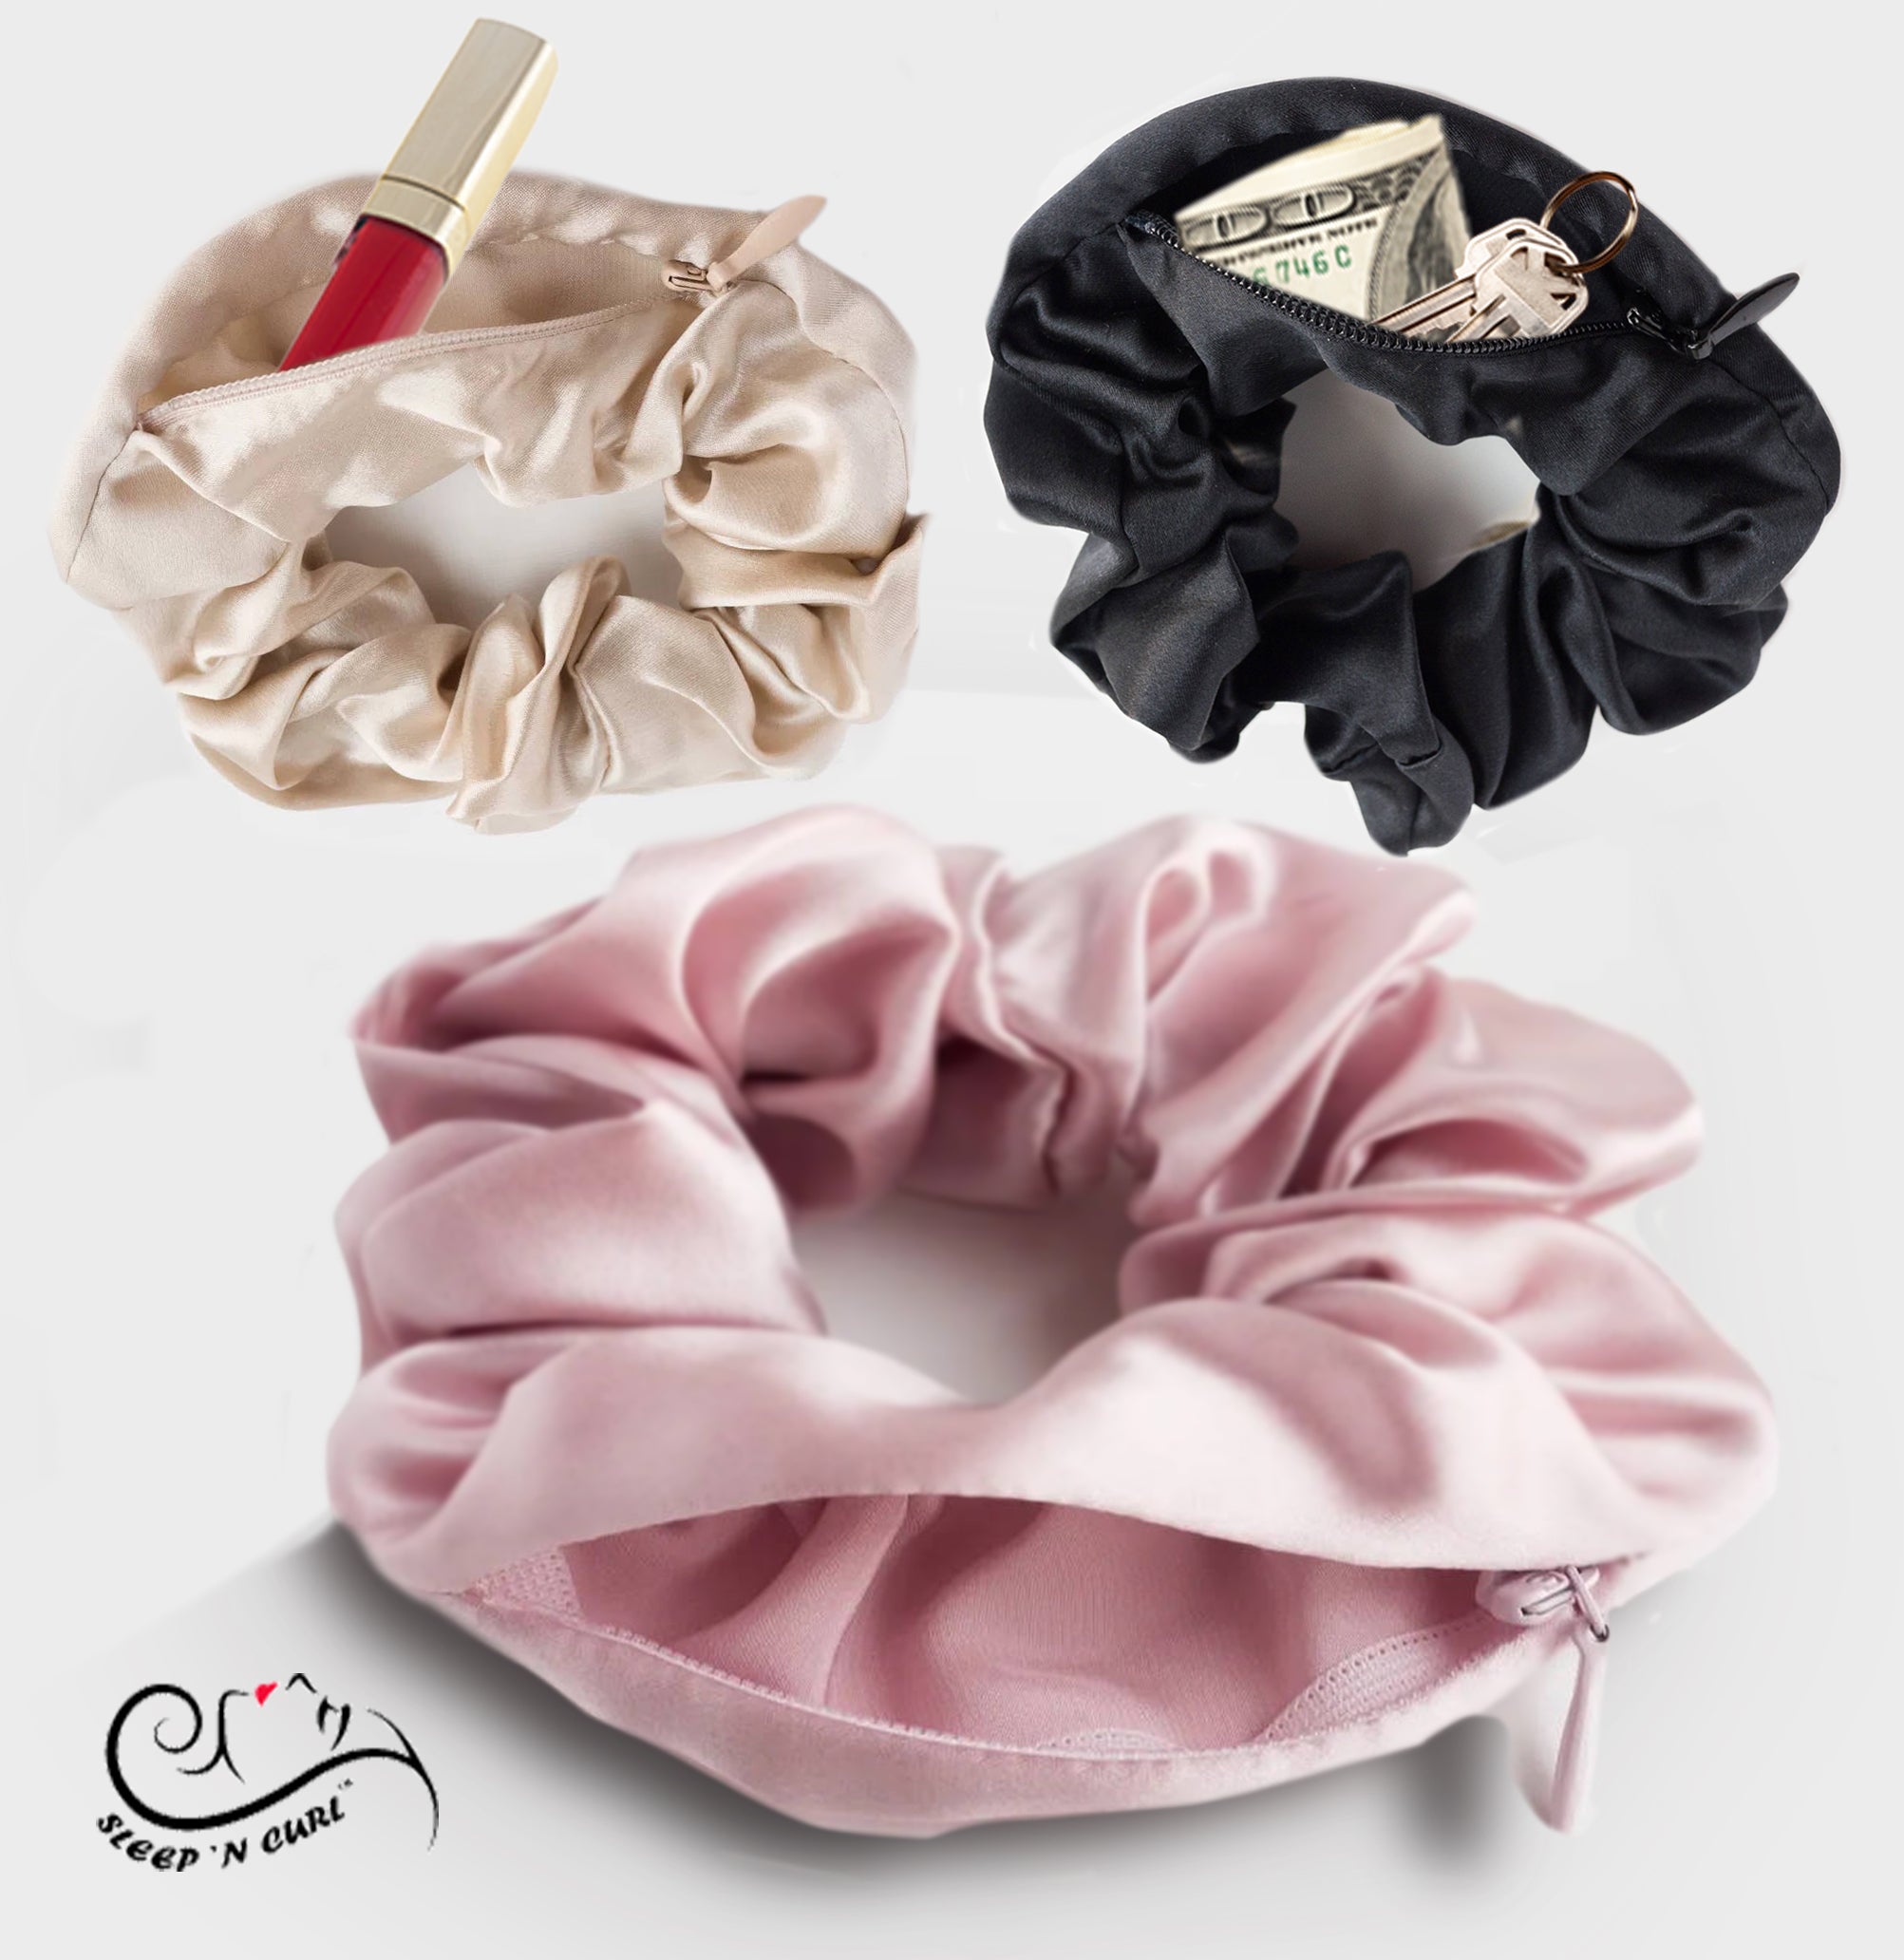 100% Pure Mulberry Silk HIDDEN POCKET Hair Tie Band Scrunchies for Women &amp; Girls (3-PACK) with SECRET STASH ZIPPER Pocket Storage for Keys, Money, &amp; Small Items (Pink, Tan &amp; Black) No Damage, No Kinks - By Sleep ‘N Curl